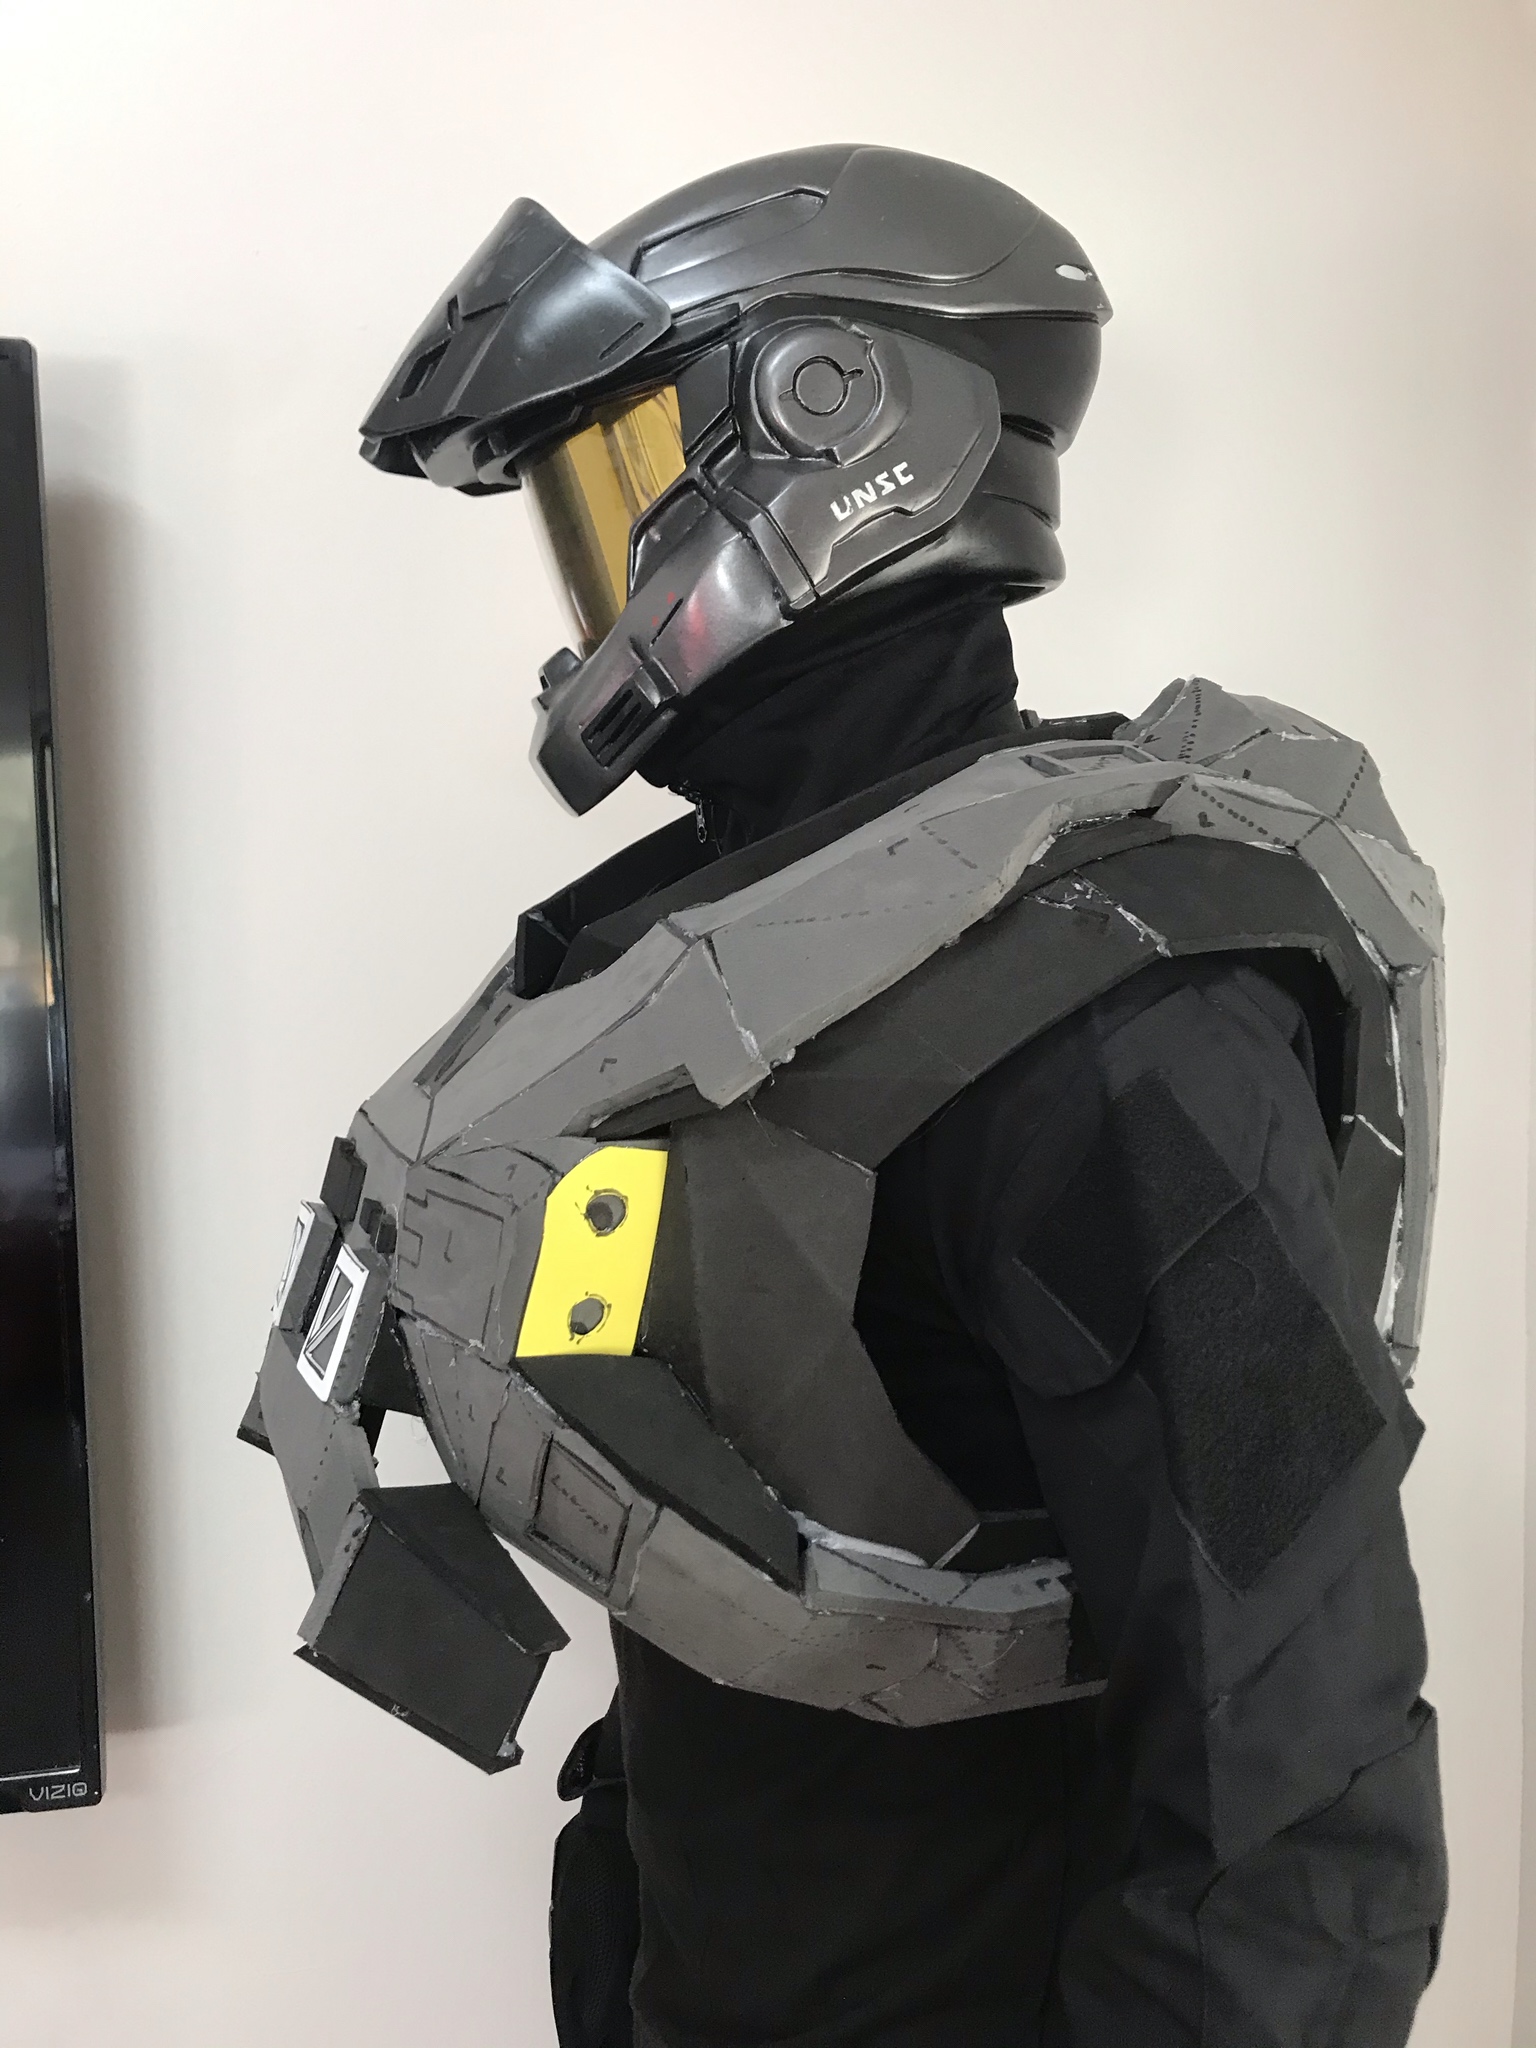 Noble 6 Concept Armor Build | Page 2 | Halo Costume and Prop Maker ...